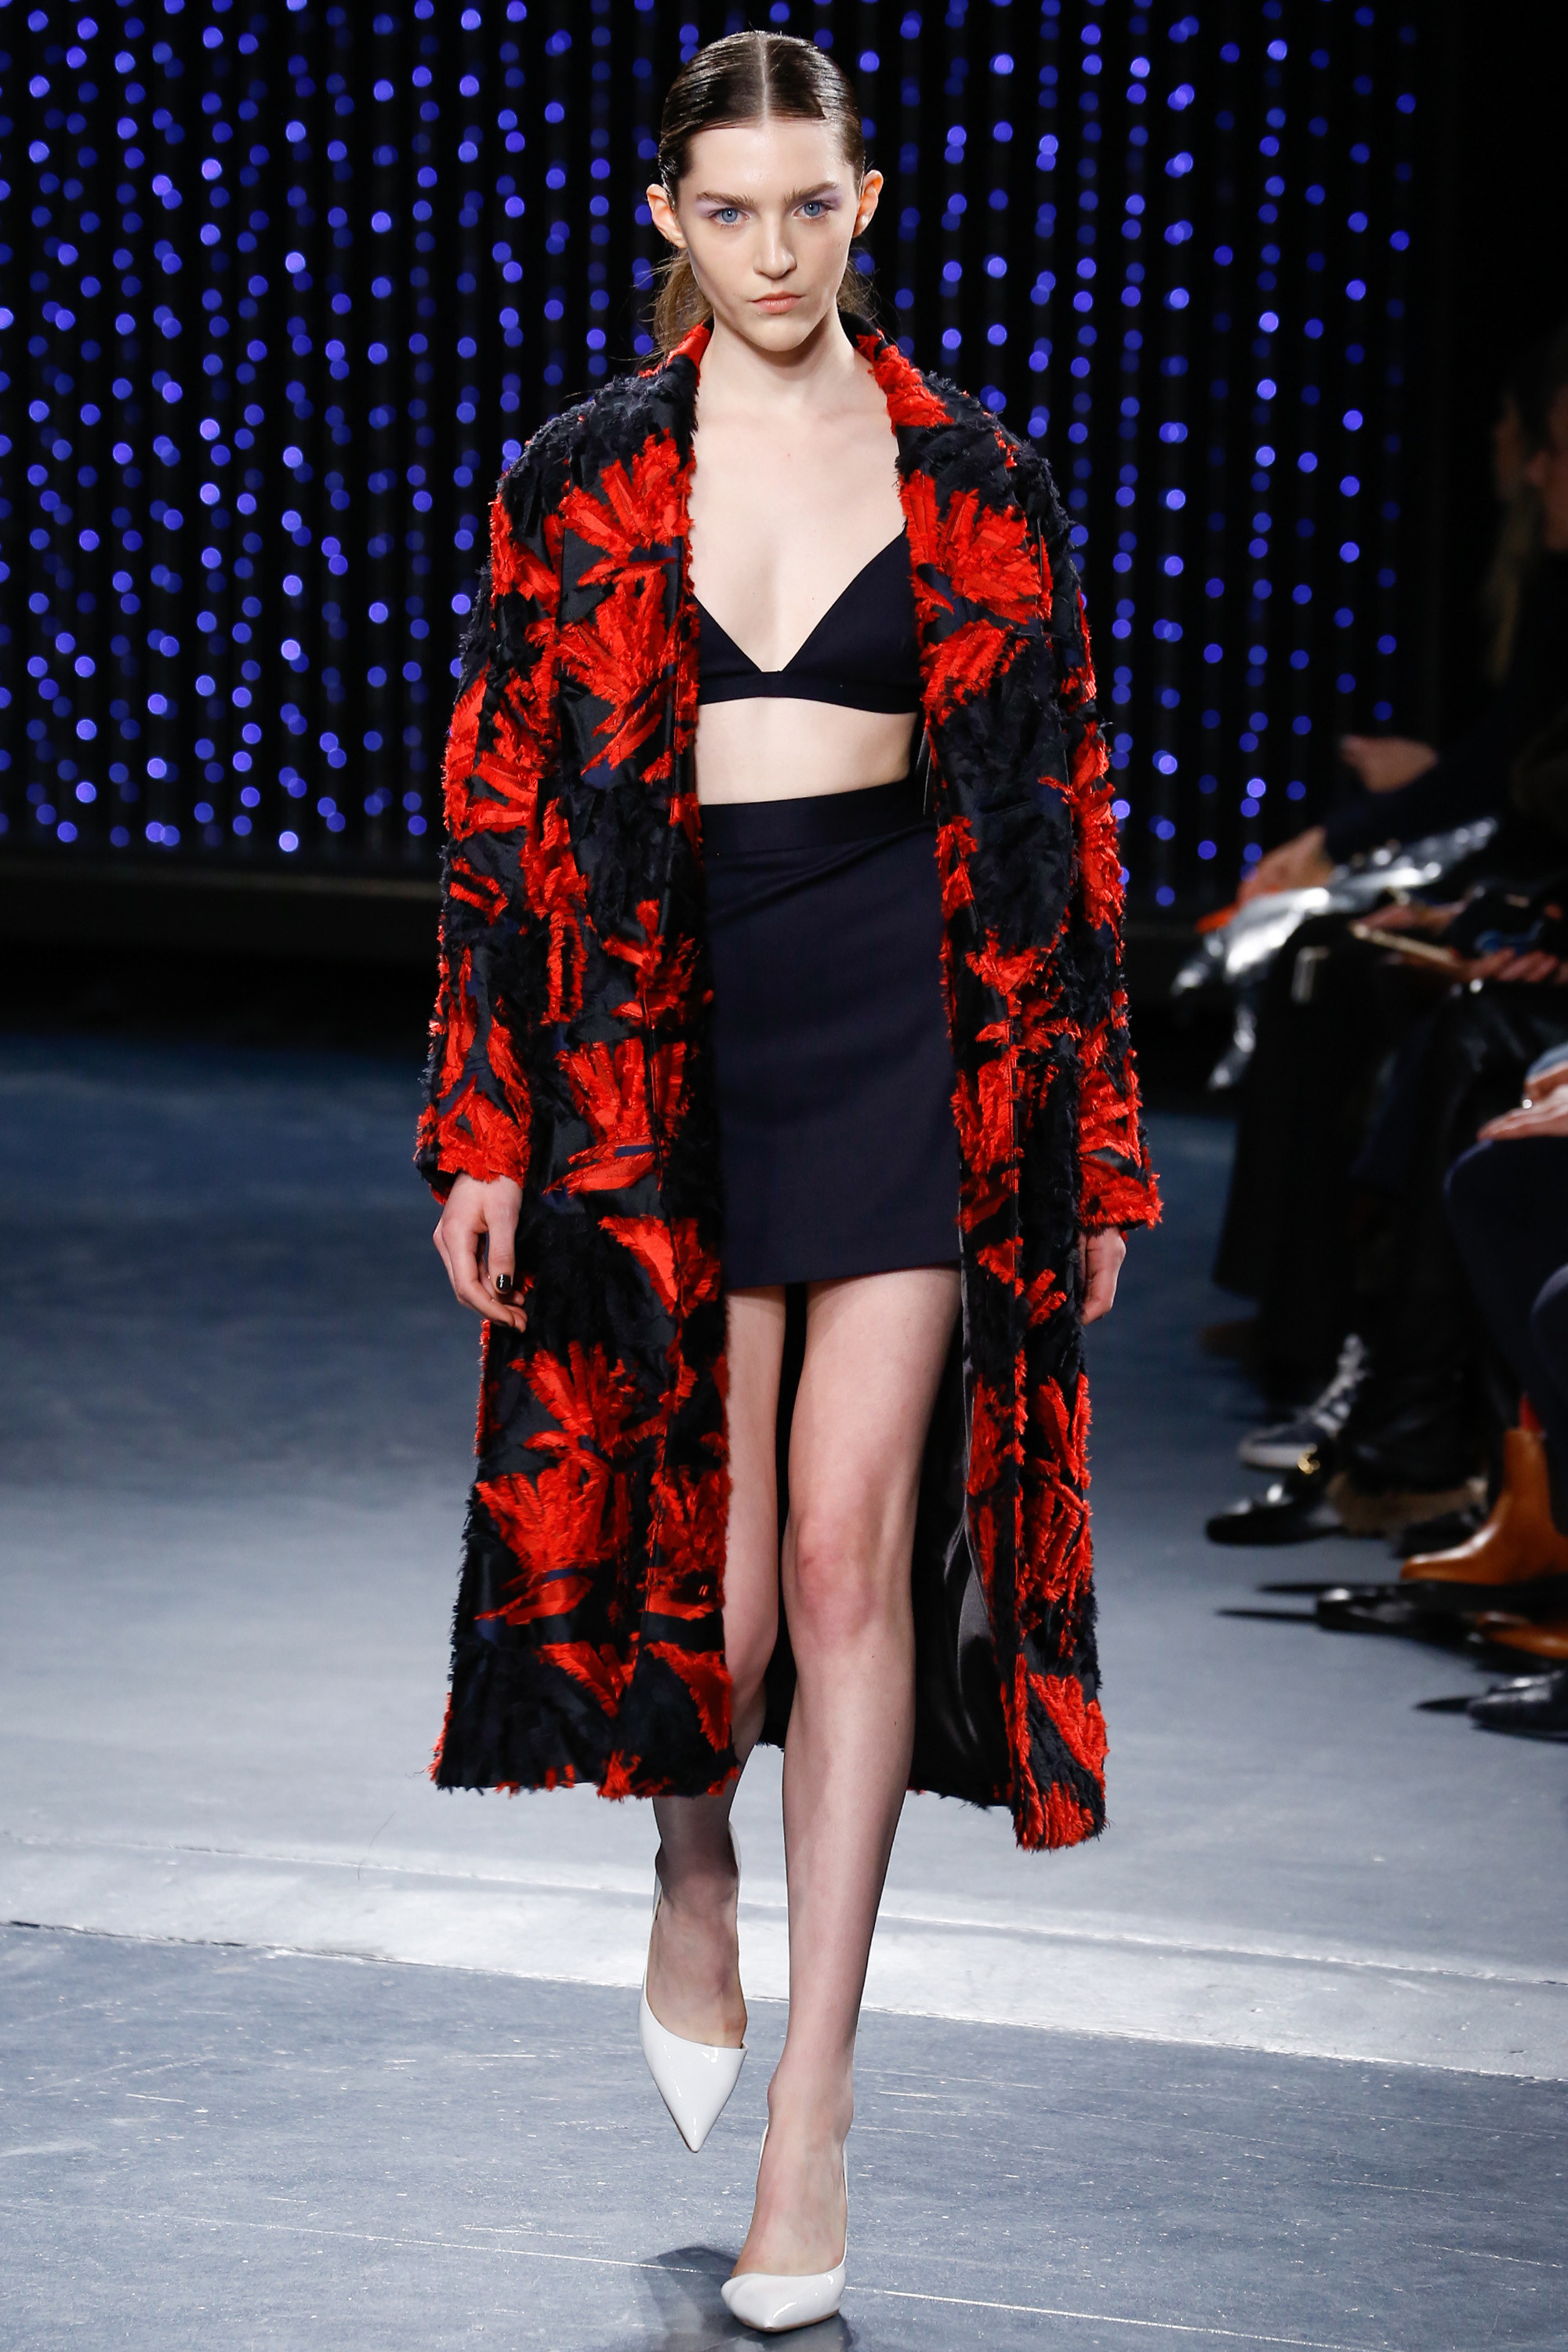 Show Review: Milly’s Fall 2016 Ready-to-Wear